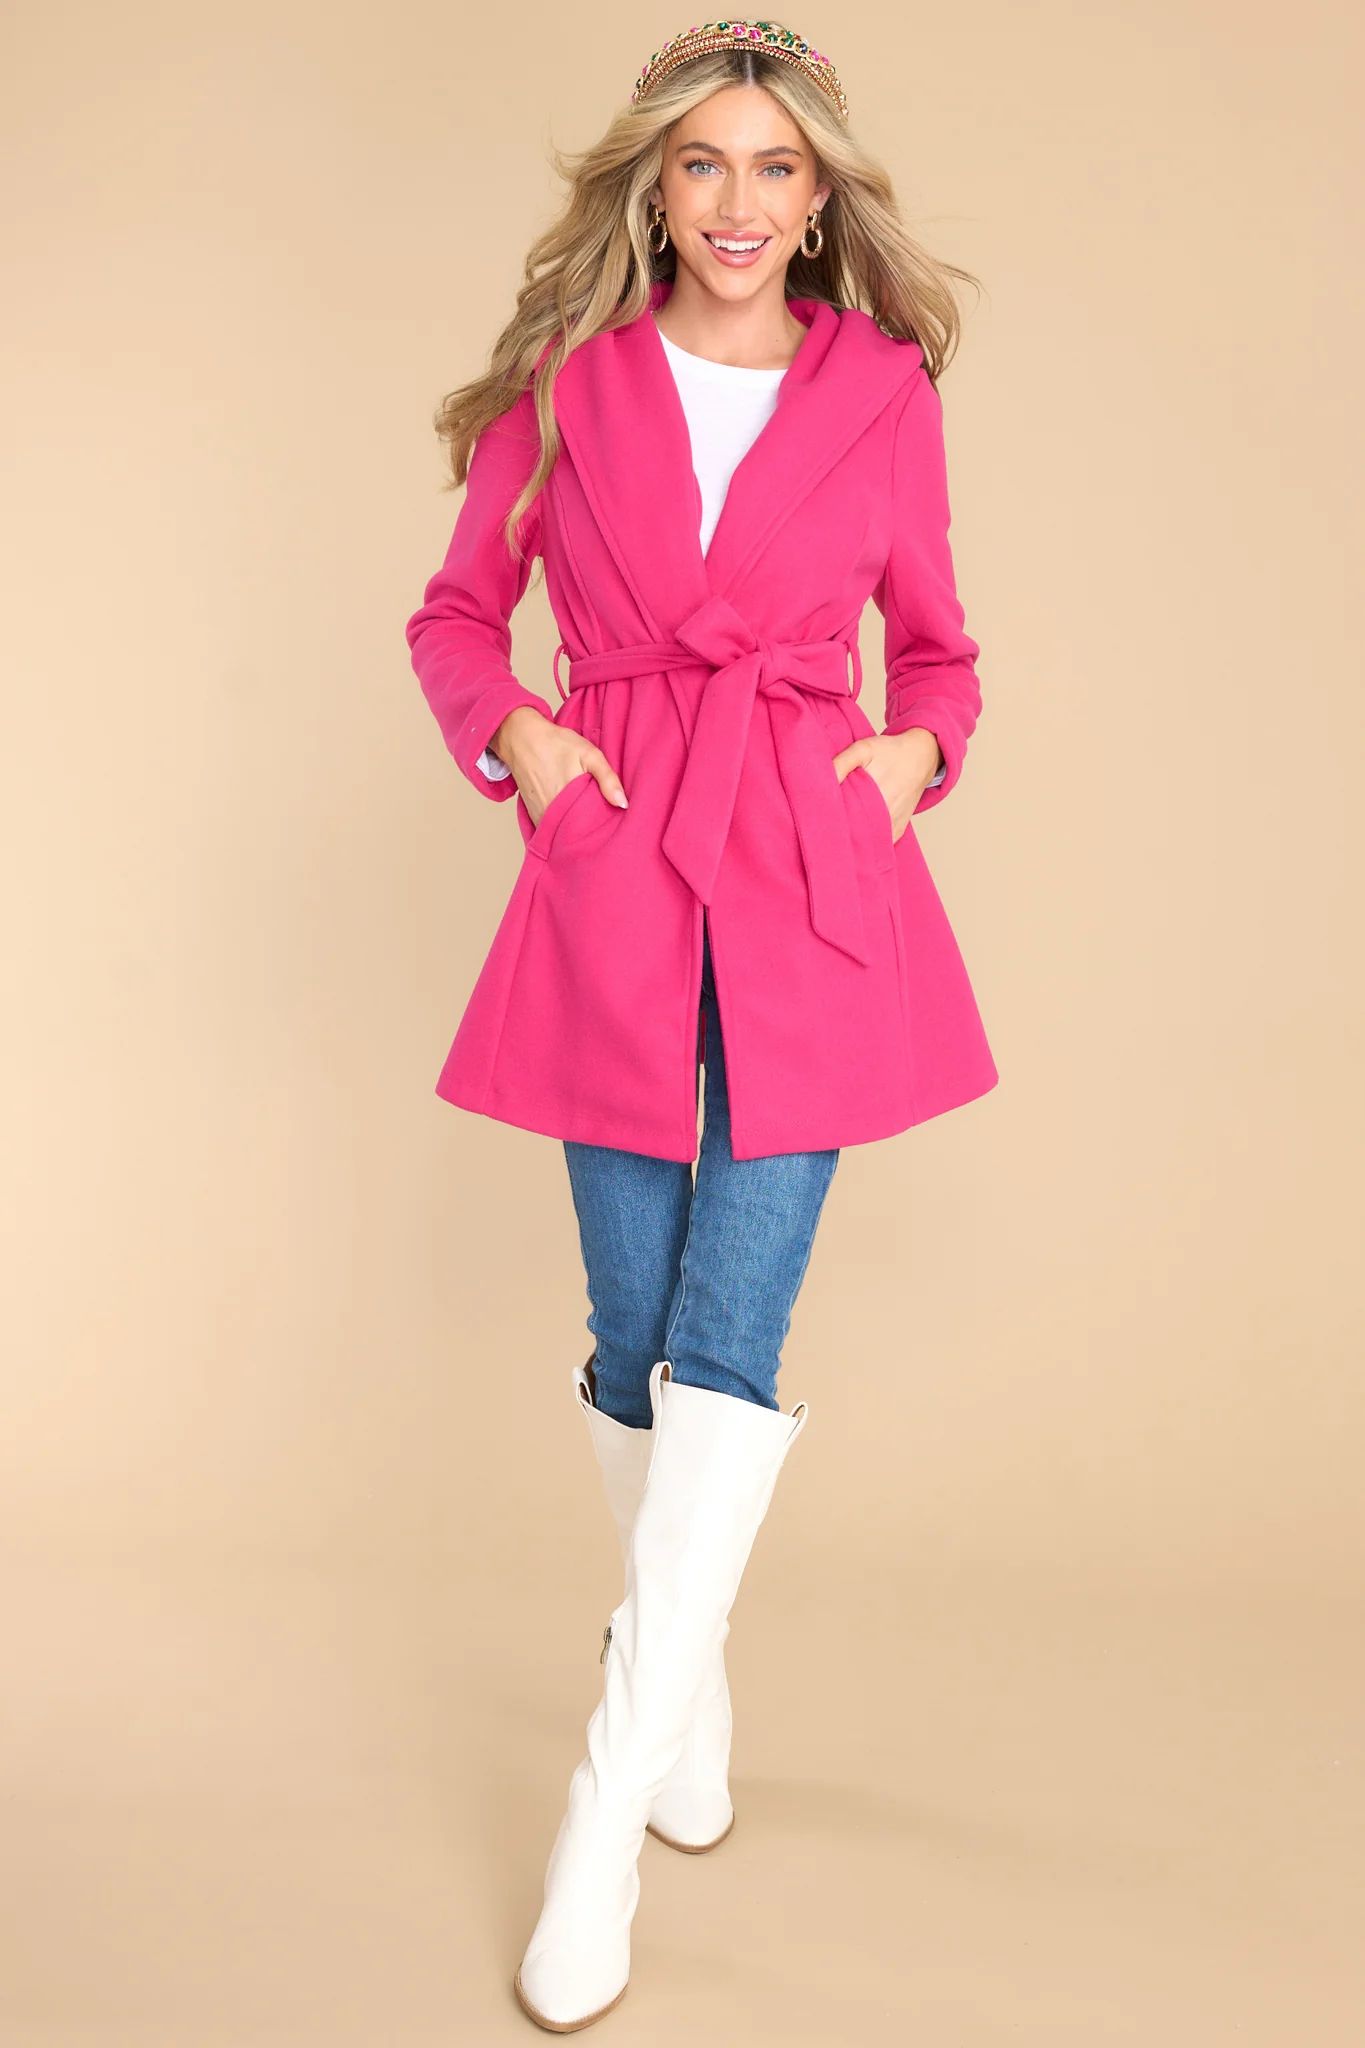 Know Deep Down Hot Pink Coat | Red Dress 